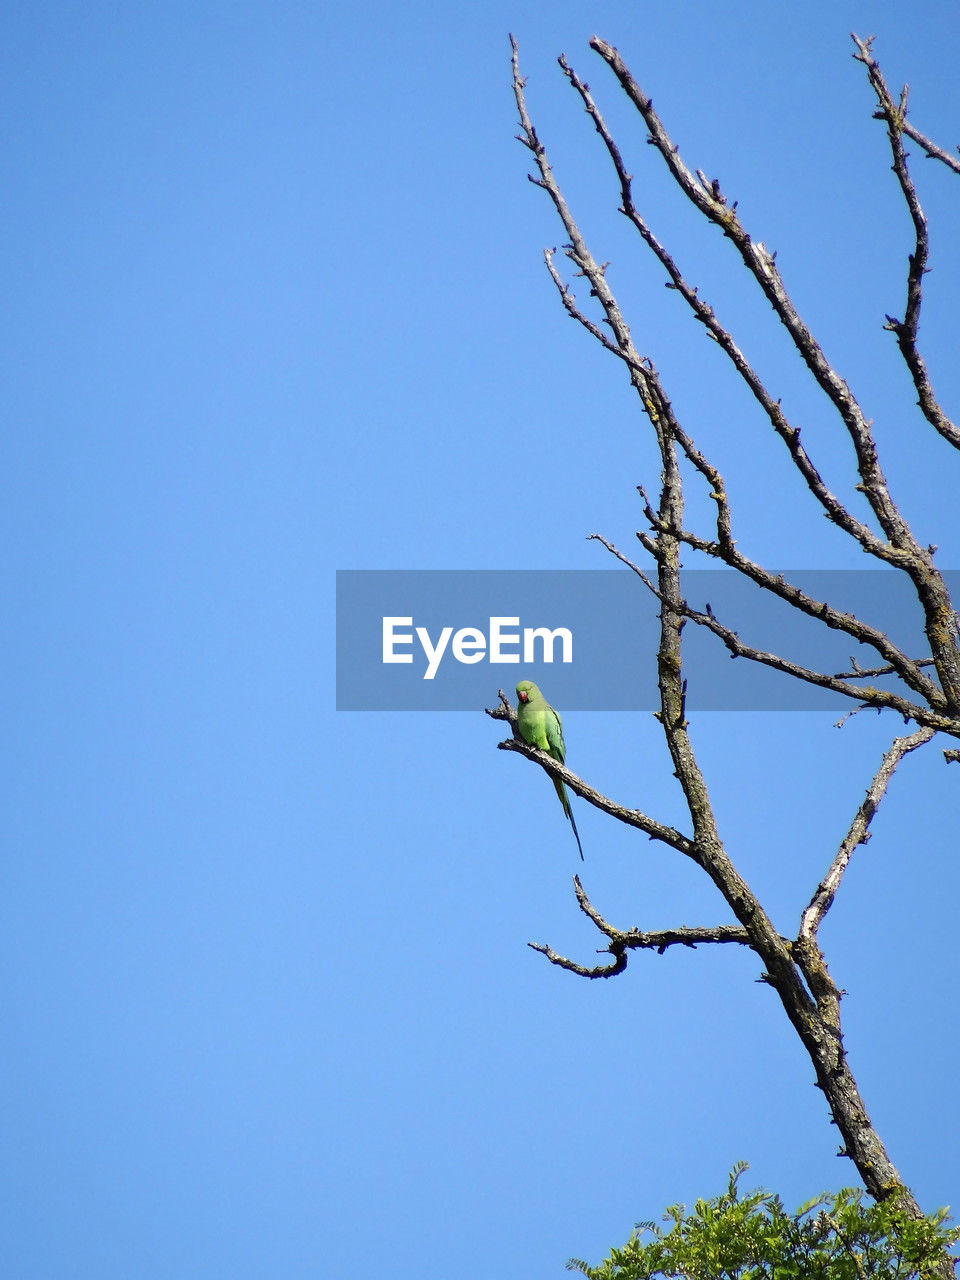 tree, blue, sky, bird, branch, animal, animal themes, animal wildlife, clear sky, plant, wildlife, nature, perching, no people, one animal, low angle view, copy space, beauty in nature, sunny, outdoors, day, flower, leaf, green, bare tree